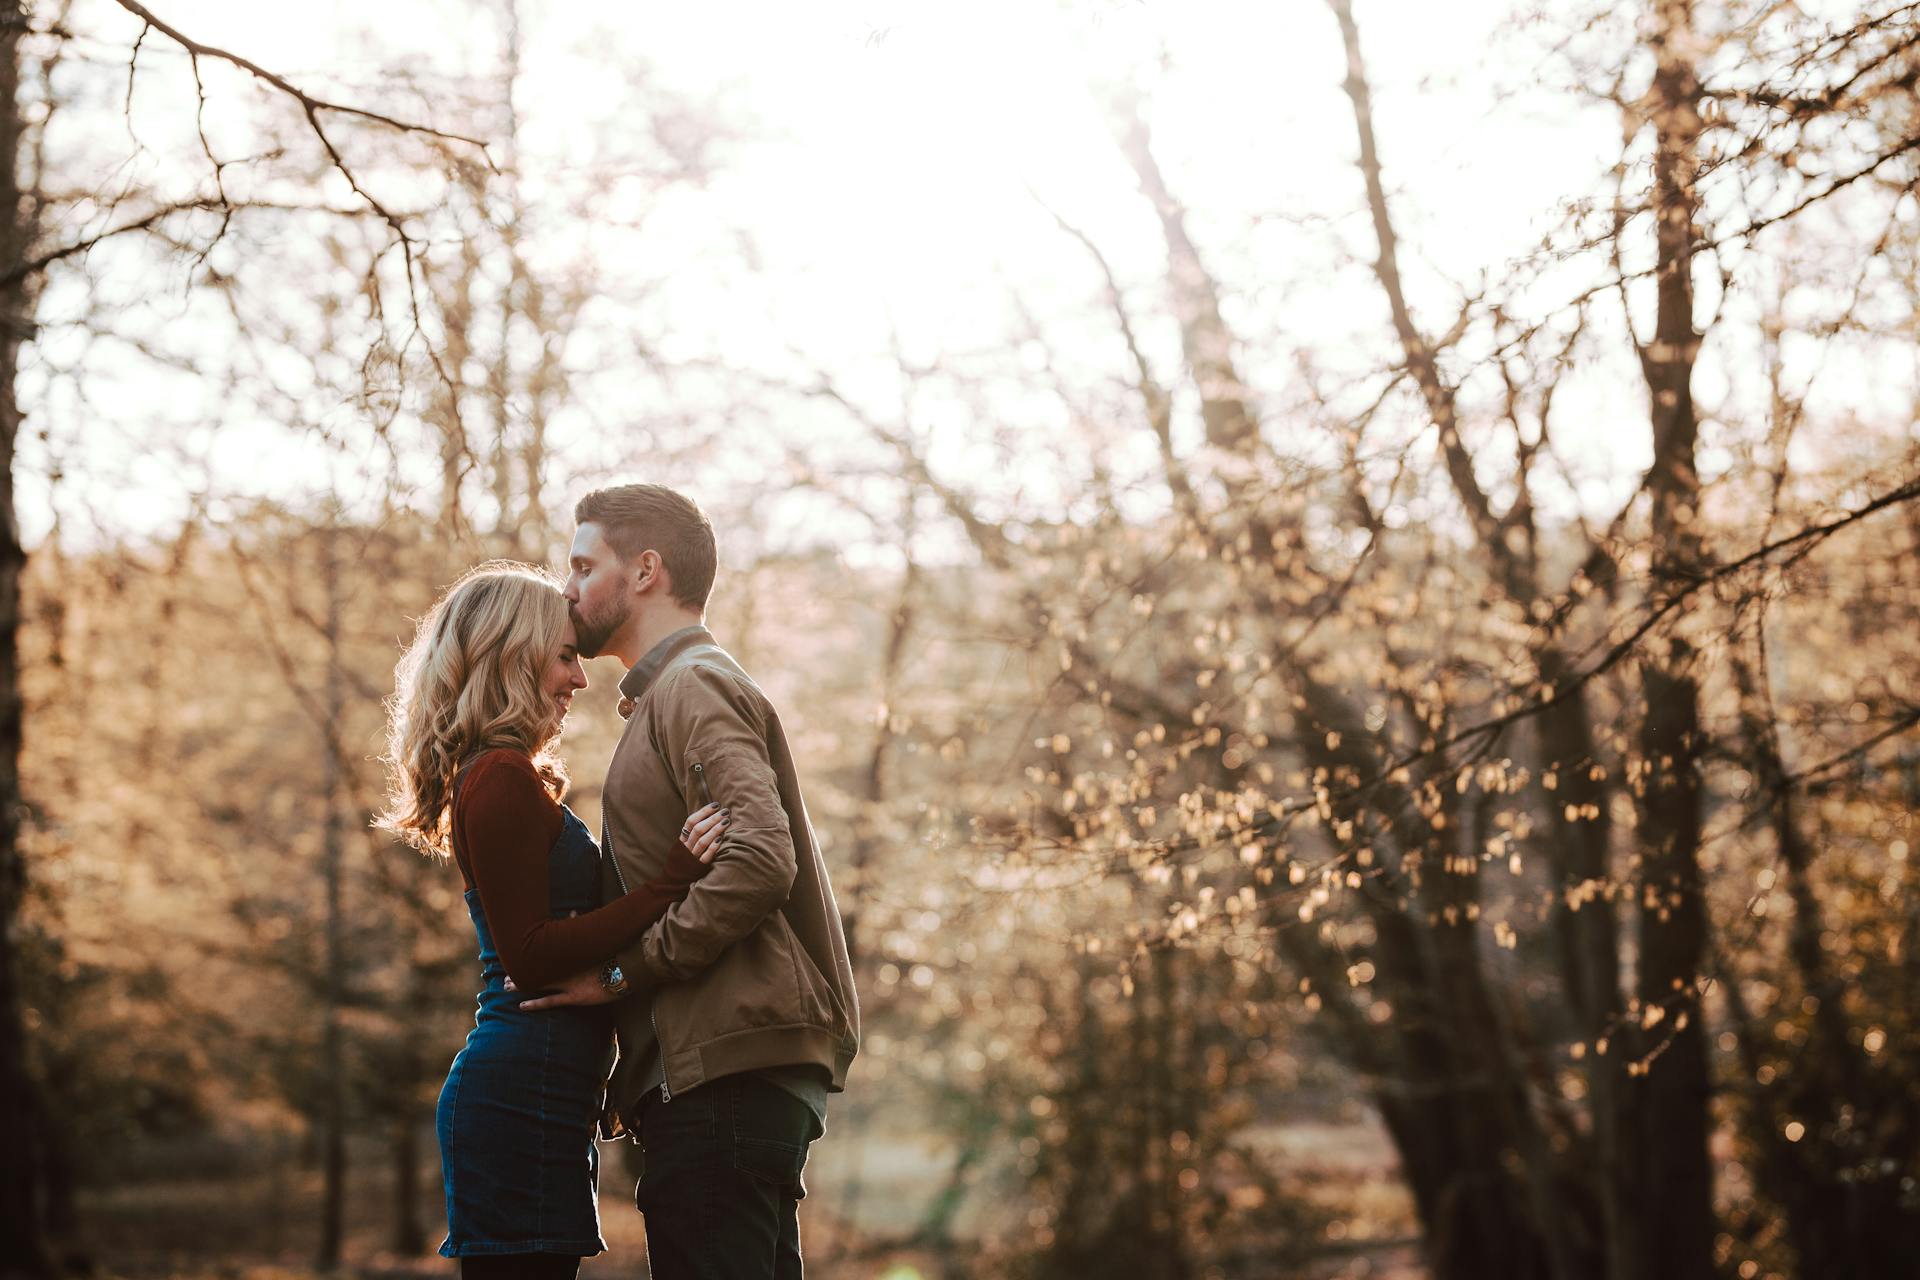 A couple standing in a park and kissing | Source: Pexels